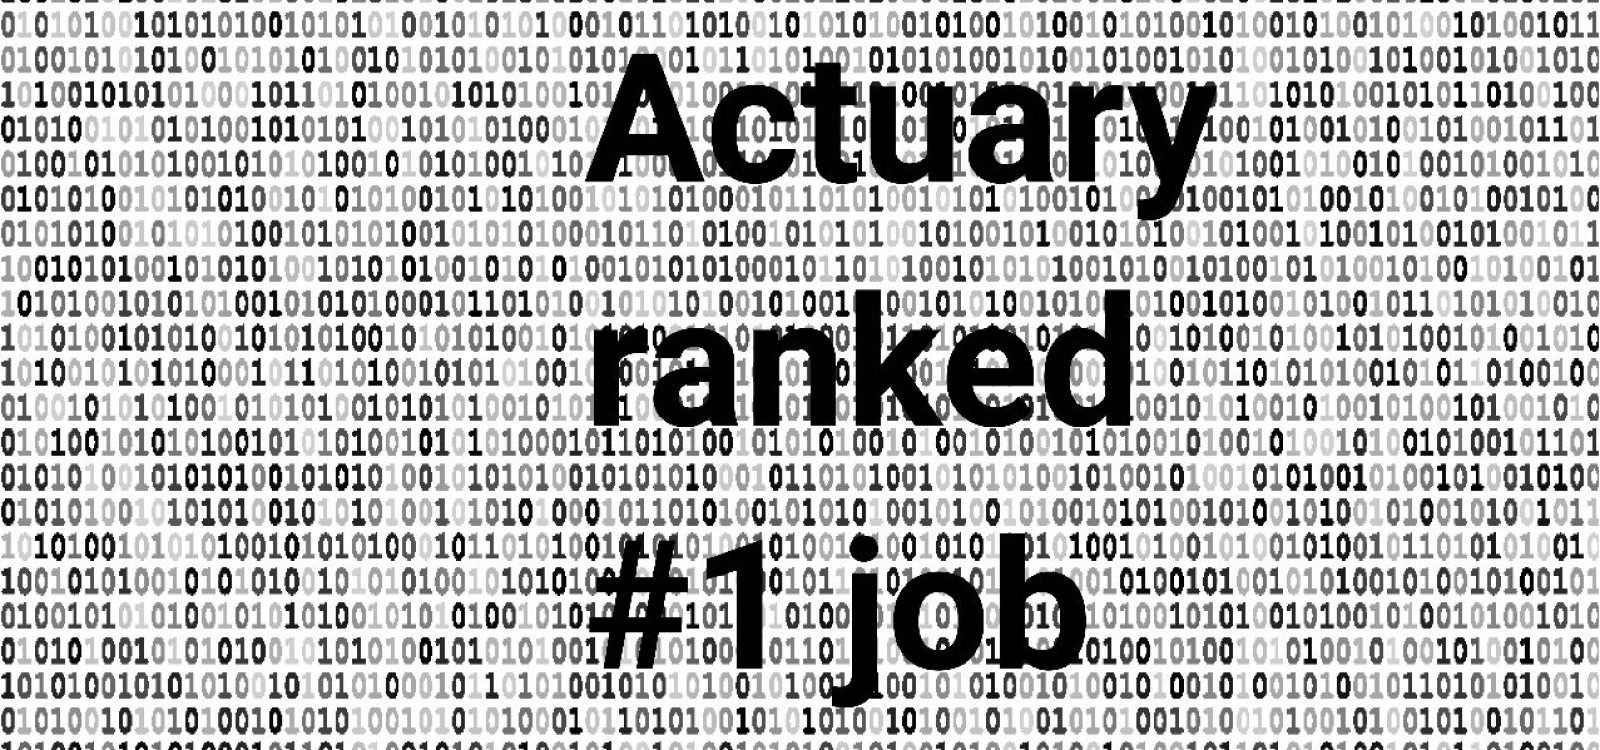 It's official – being an actuary is the best job! - It's official – being  an actuary is the best job! | Actuaries Digital